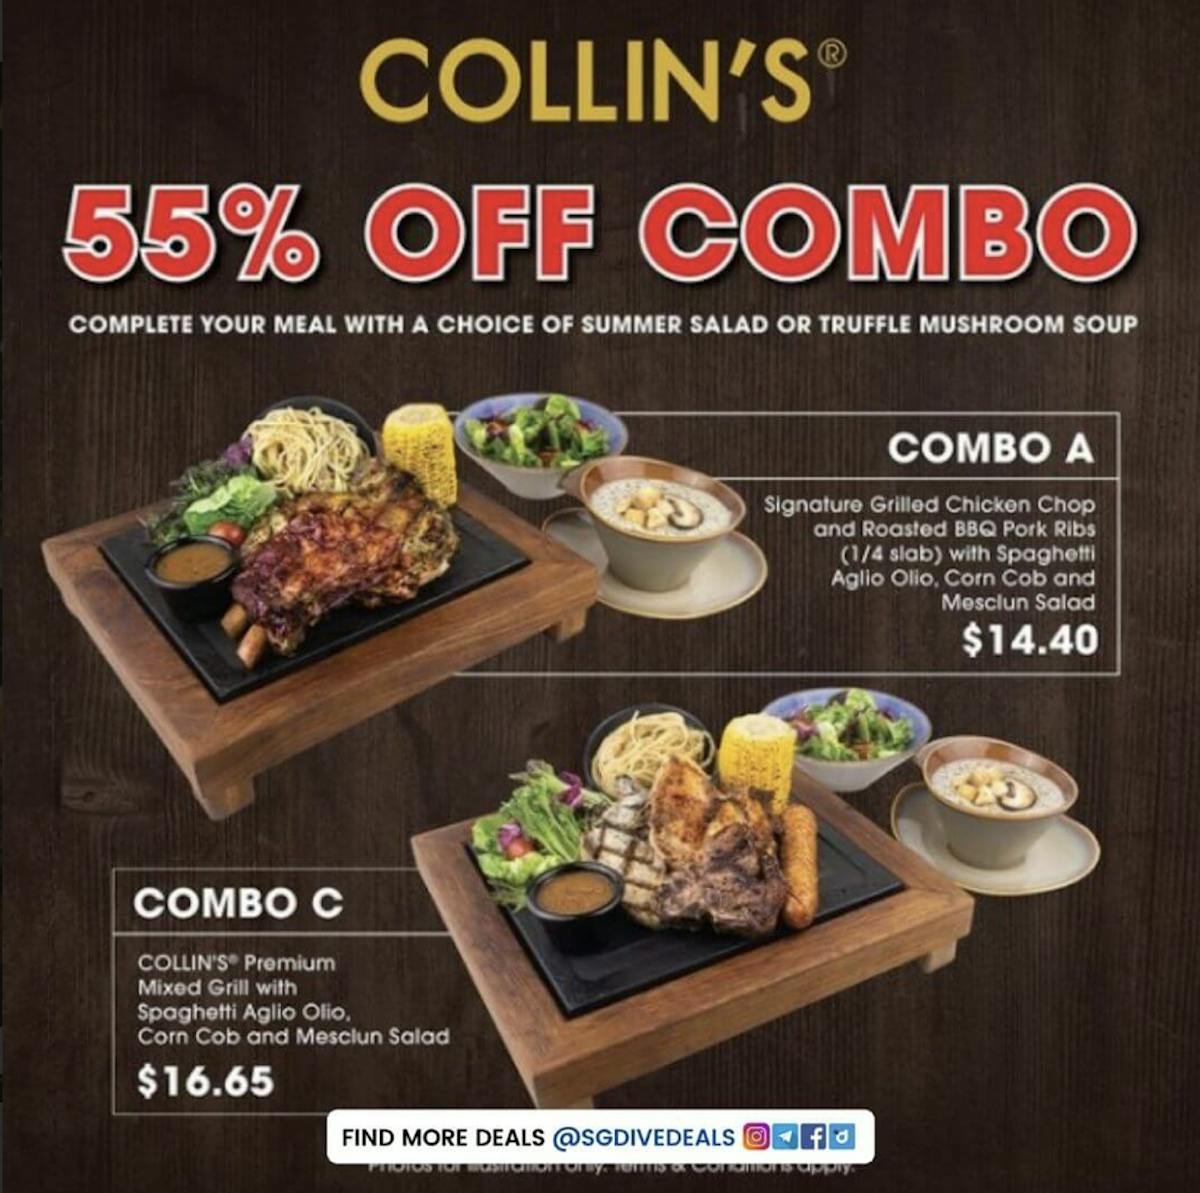 55% off combo meal